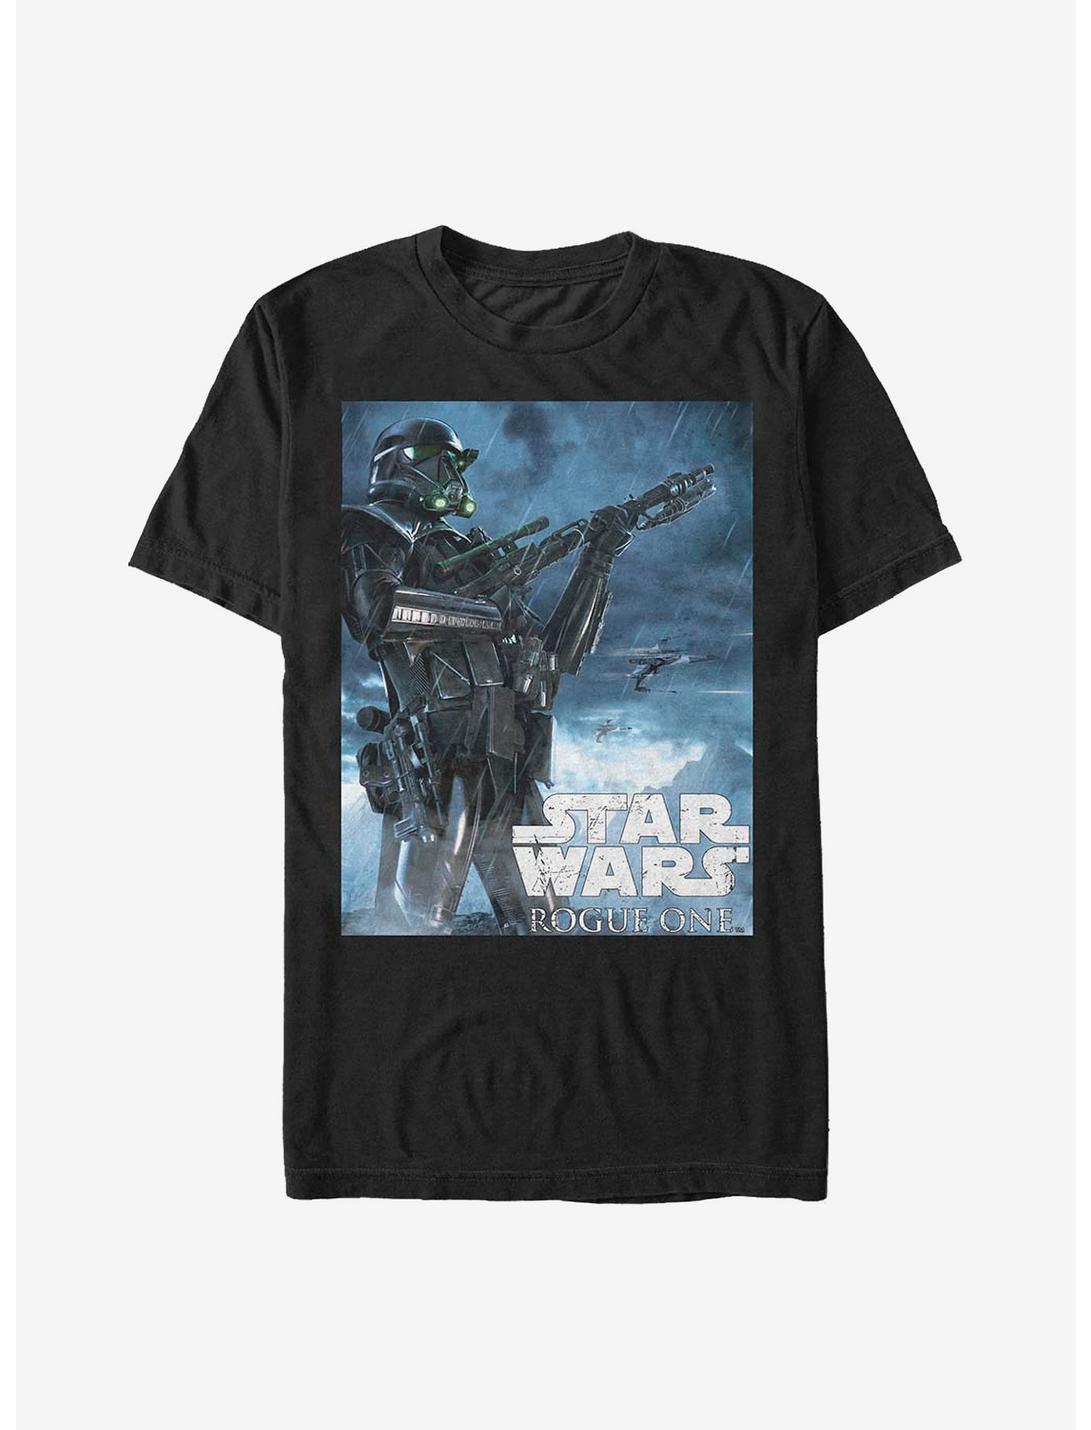 Star Wars Rogue One: A Star Wars Story Equipped T-Shirt, BLACK, hi-res